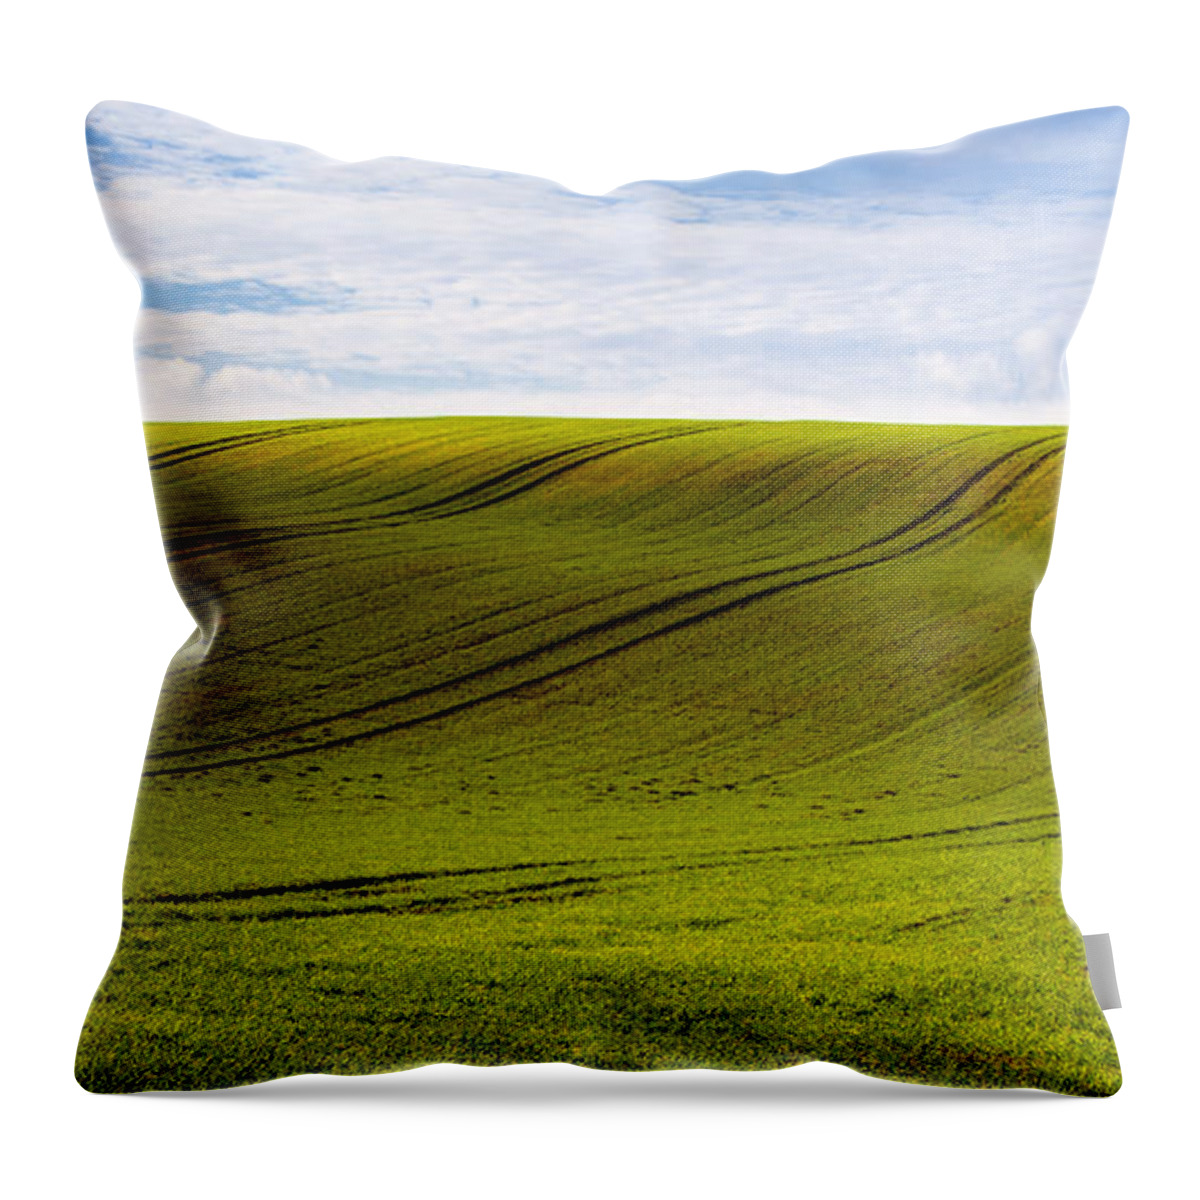 Bushes Throw Pillow featuring the photograph Green Hill by Svetlana Sewell